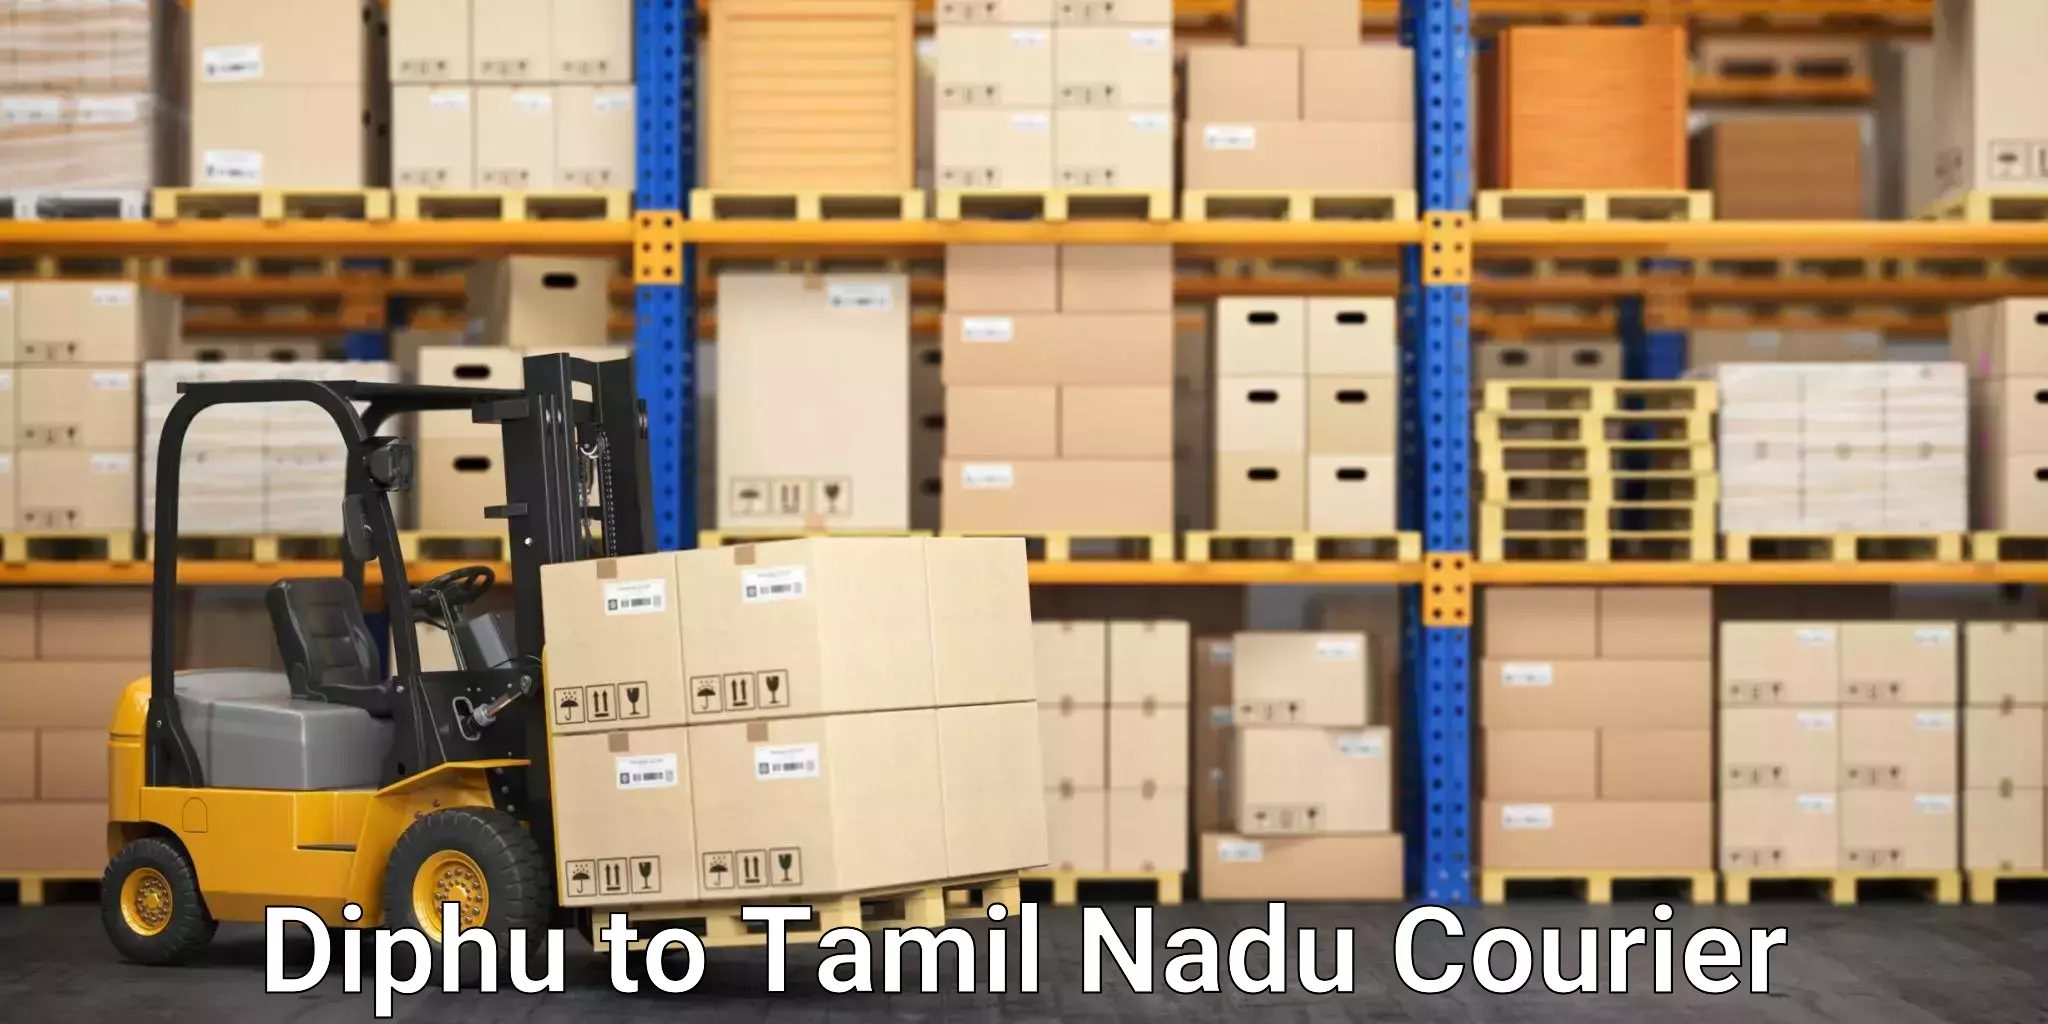 State-of-the-art courier technology Diphu to Viluppuram